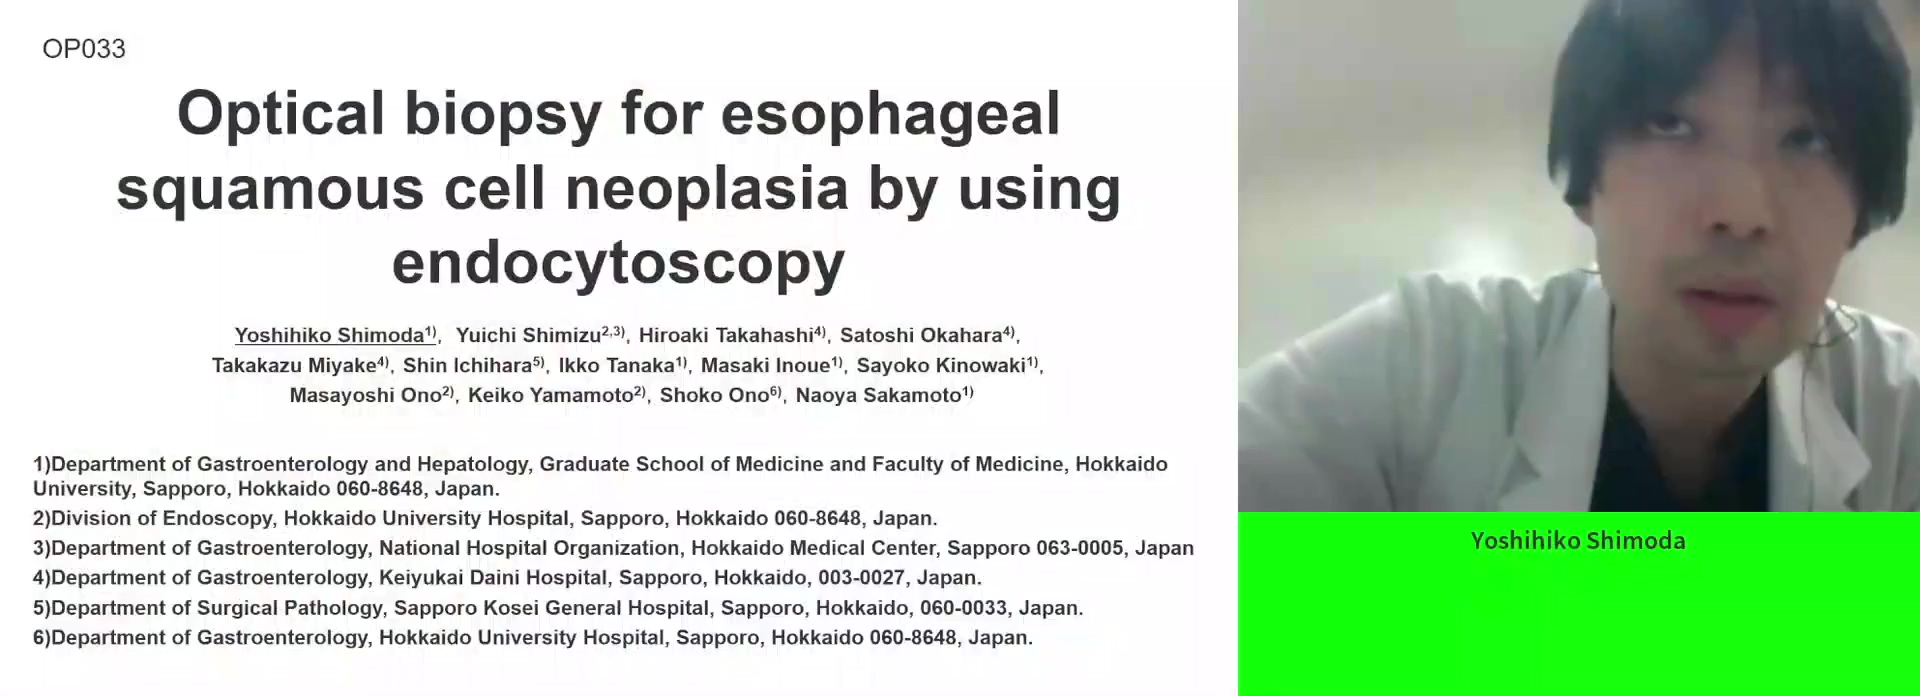 OPTICAL BIOPSY FOR ESOPHAGEAL SQUAMOUS CELL NEOPLASIA BY USING ENDOCYTOSCOPY